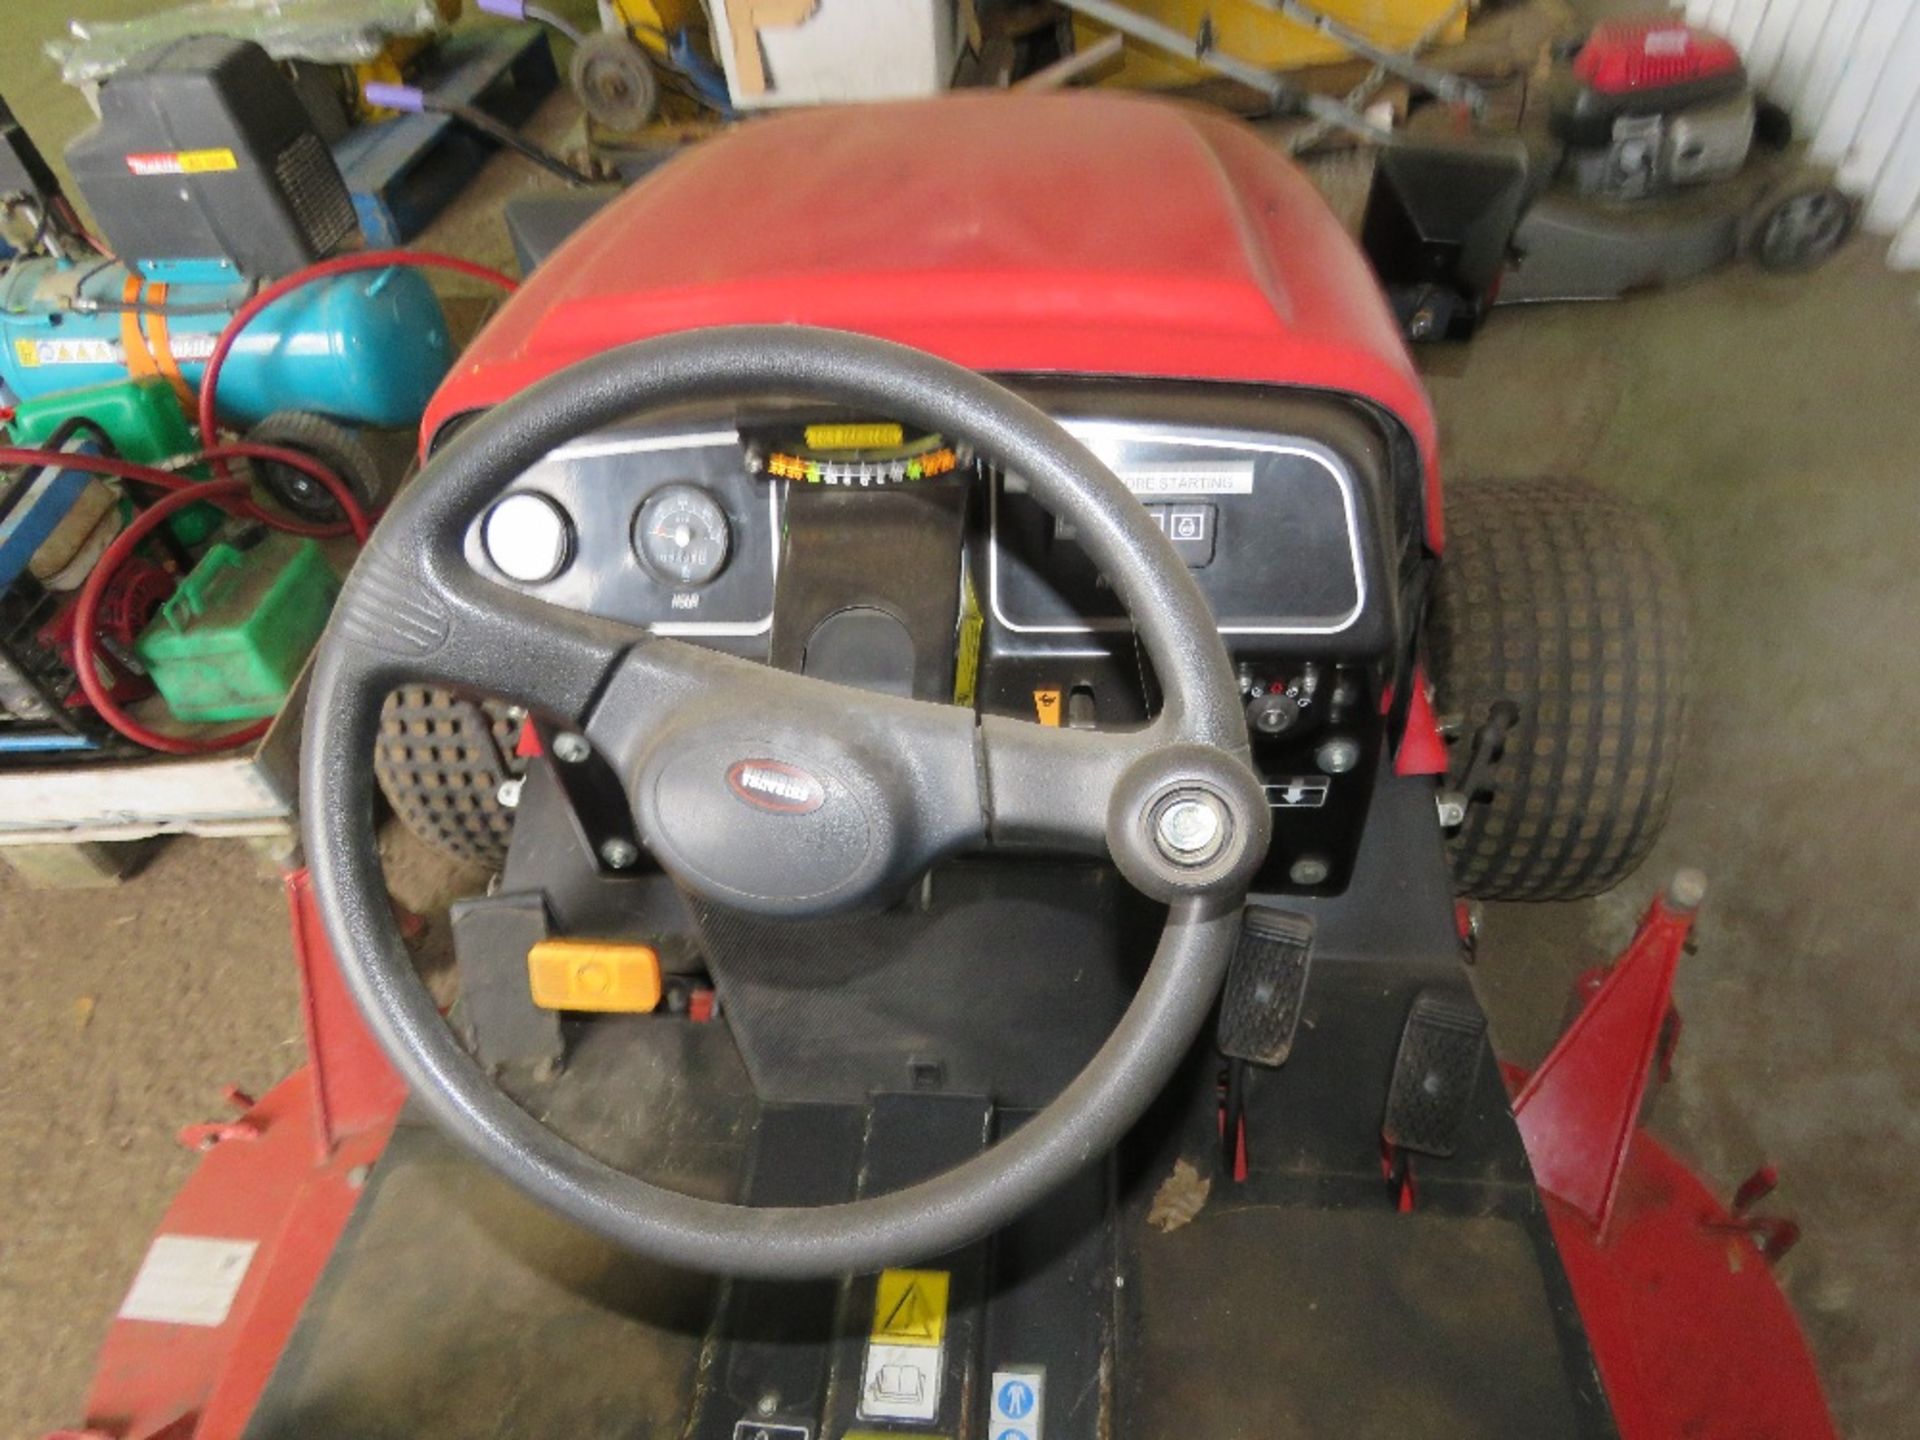 SHIBAURA SG280 GREEN SPECIAL RIDE ON MOWER WITH 5FT CUTTING DECK. 342 REC HOURS. REG:NK18 BJO WITH V - Bild 9 aus 10